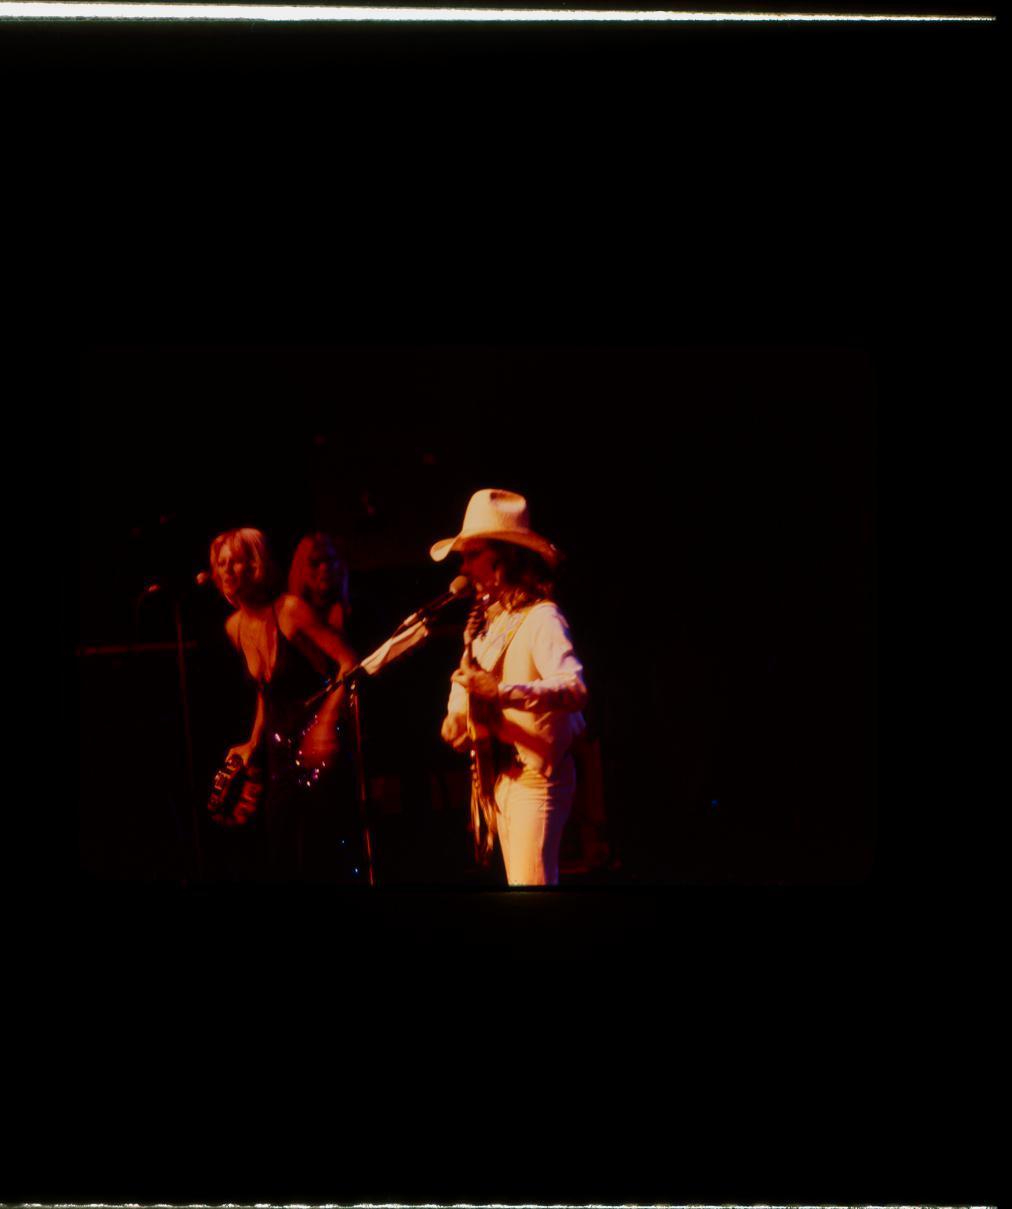 Cleaning out my office I found a bunch of slides I took from the Enlightened Rogues tour in 1979 at Madison Square Garden.  Alas, with new technology they have been scanned and here a few golden oldie memories:

Betts and Bonnie Bramlett
Gregg Allman